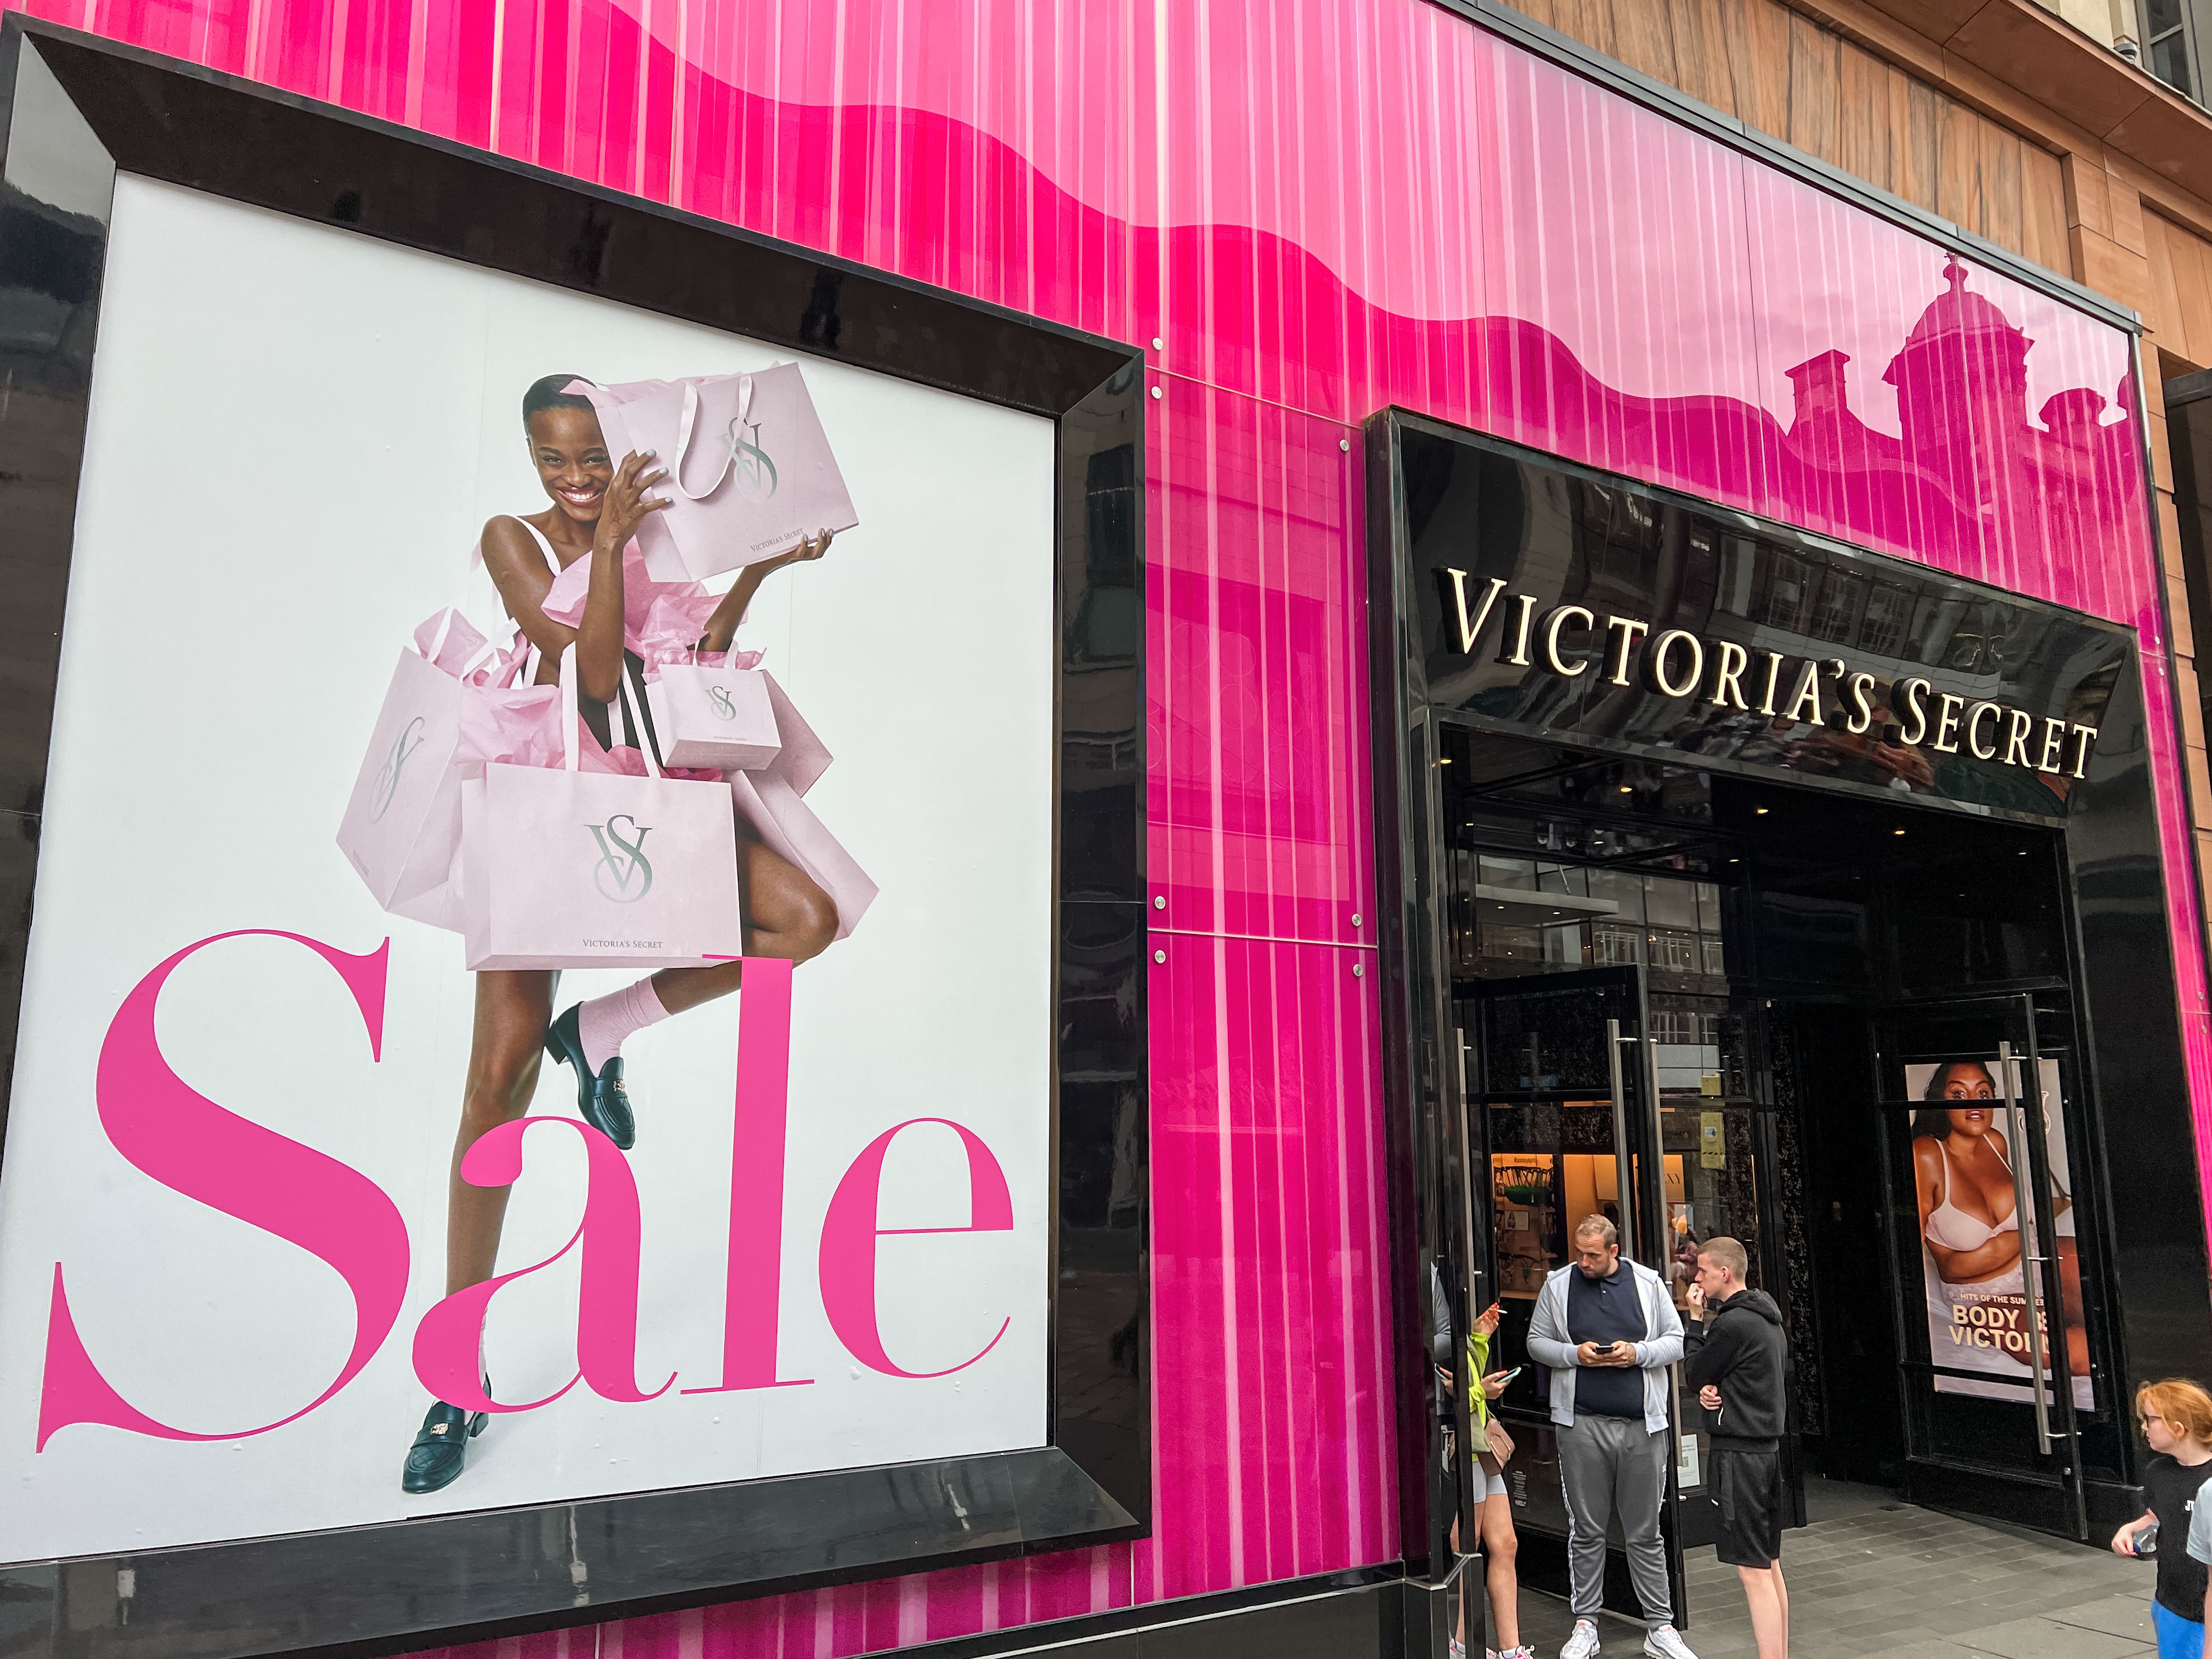 Victoria's Secret returns to TV — but its challenges are bigger than  branding